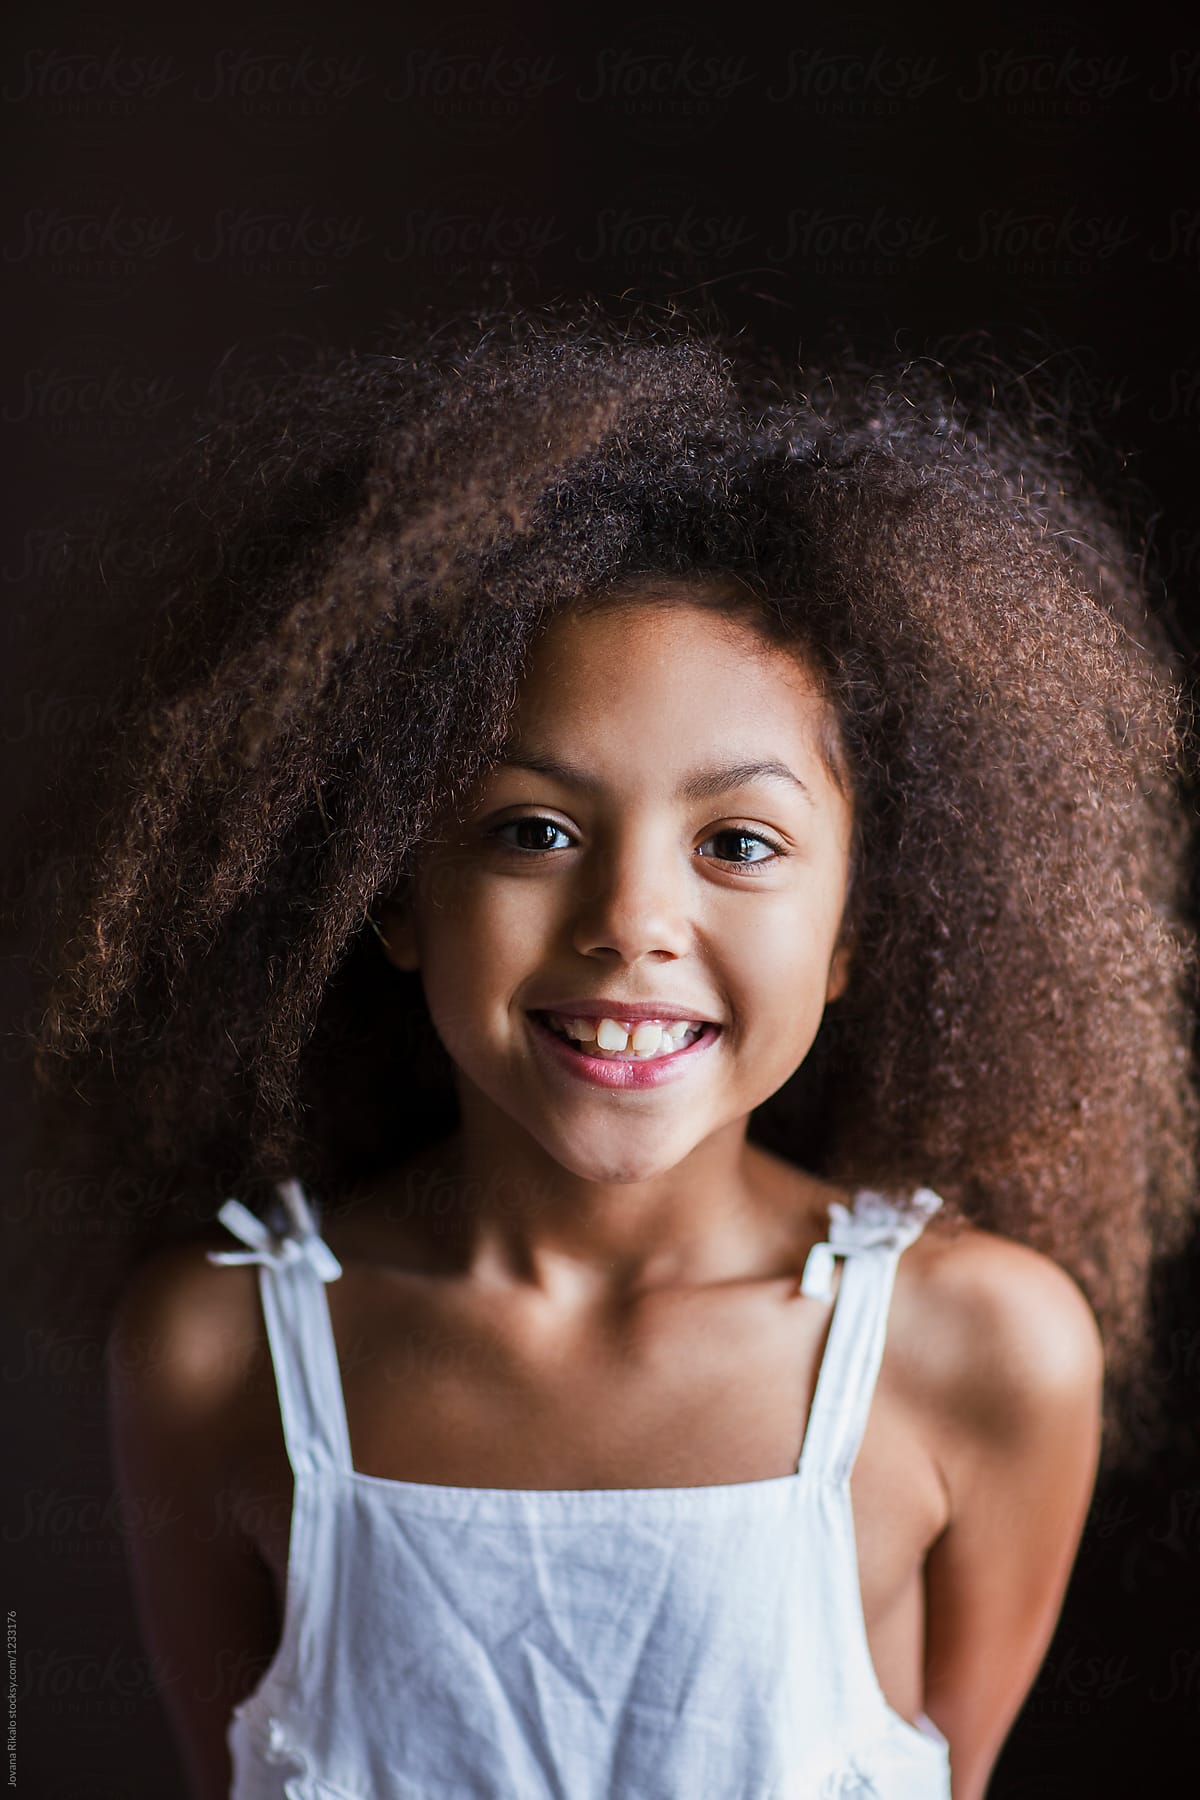 &amp;quot;Portrait Of A Mixed Race Little Girl&amp;quot; by Stocksy Contributor &amp;quot;Jovana ...